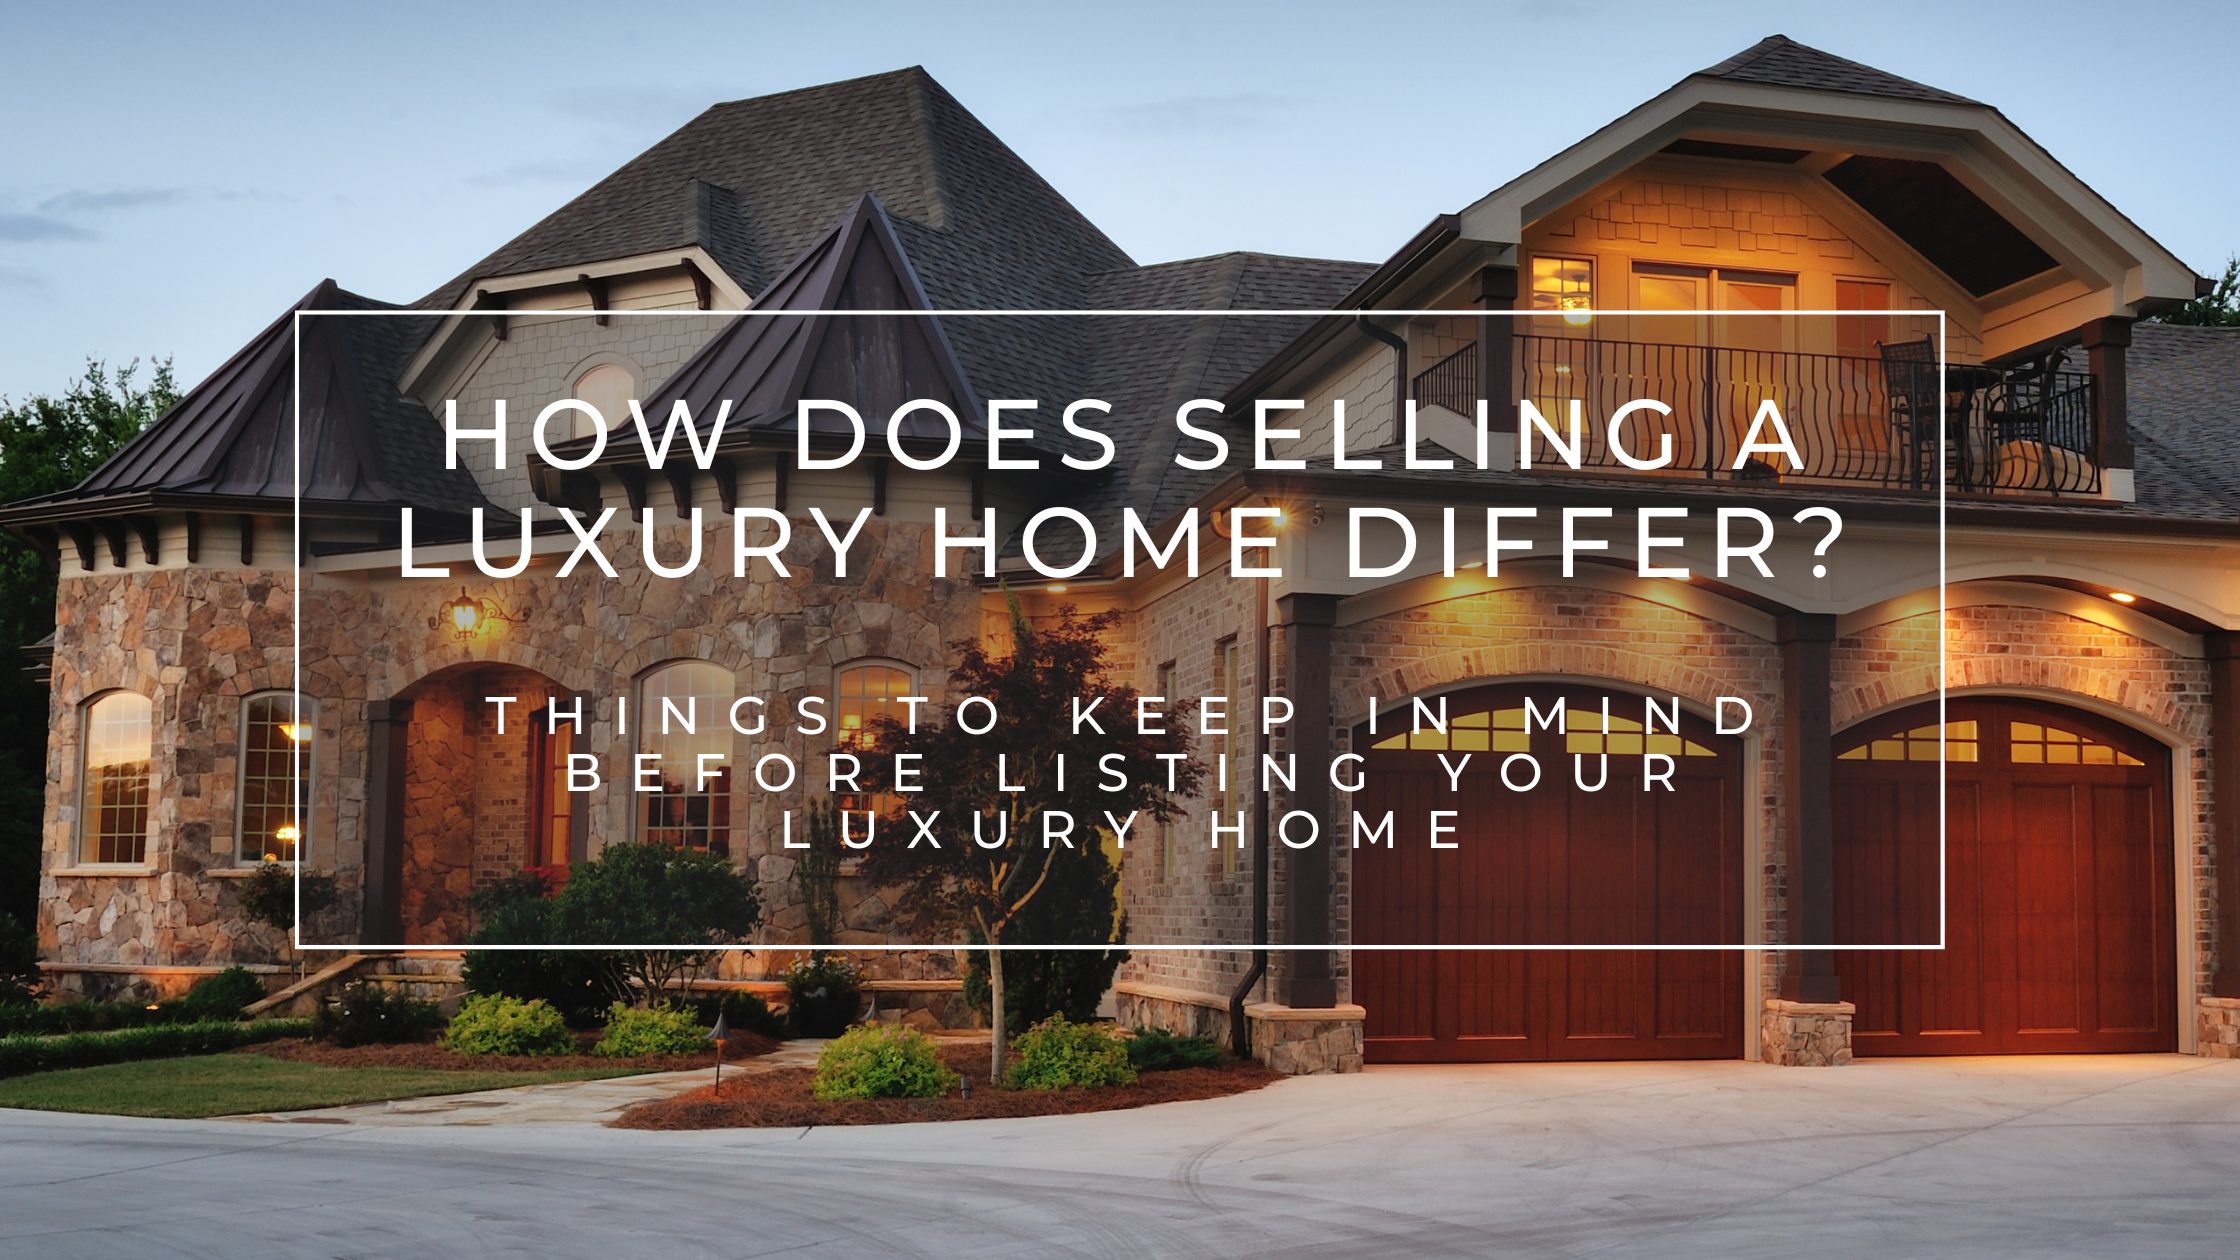 How does selling a luxury home differ